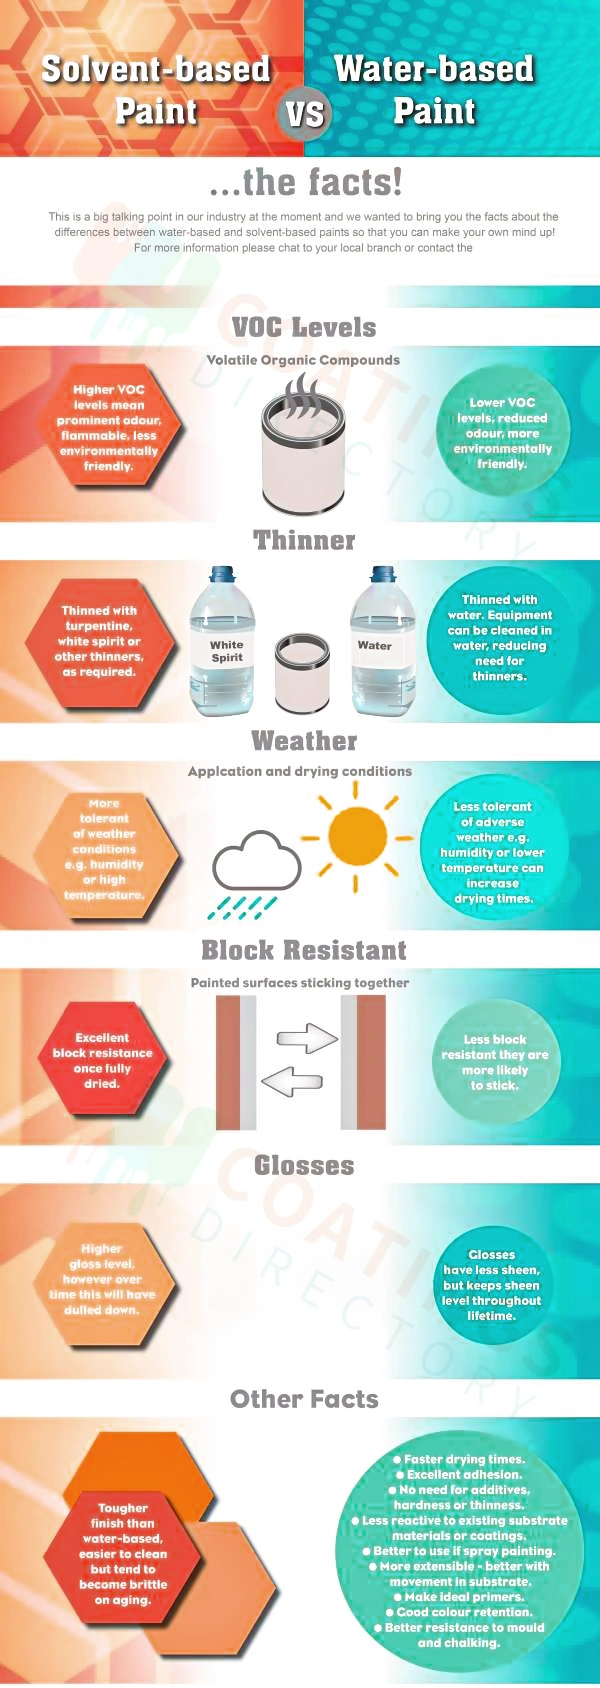 What's the difference between solvent and water based paint